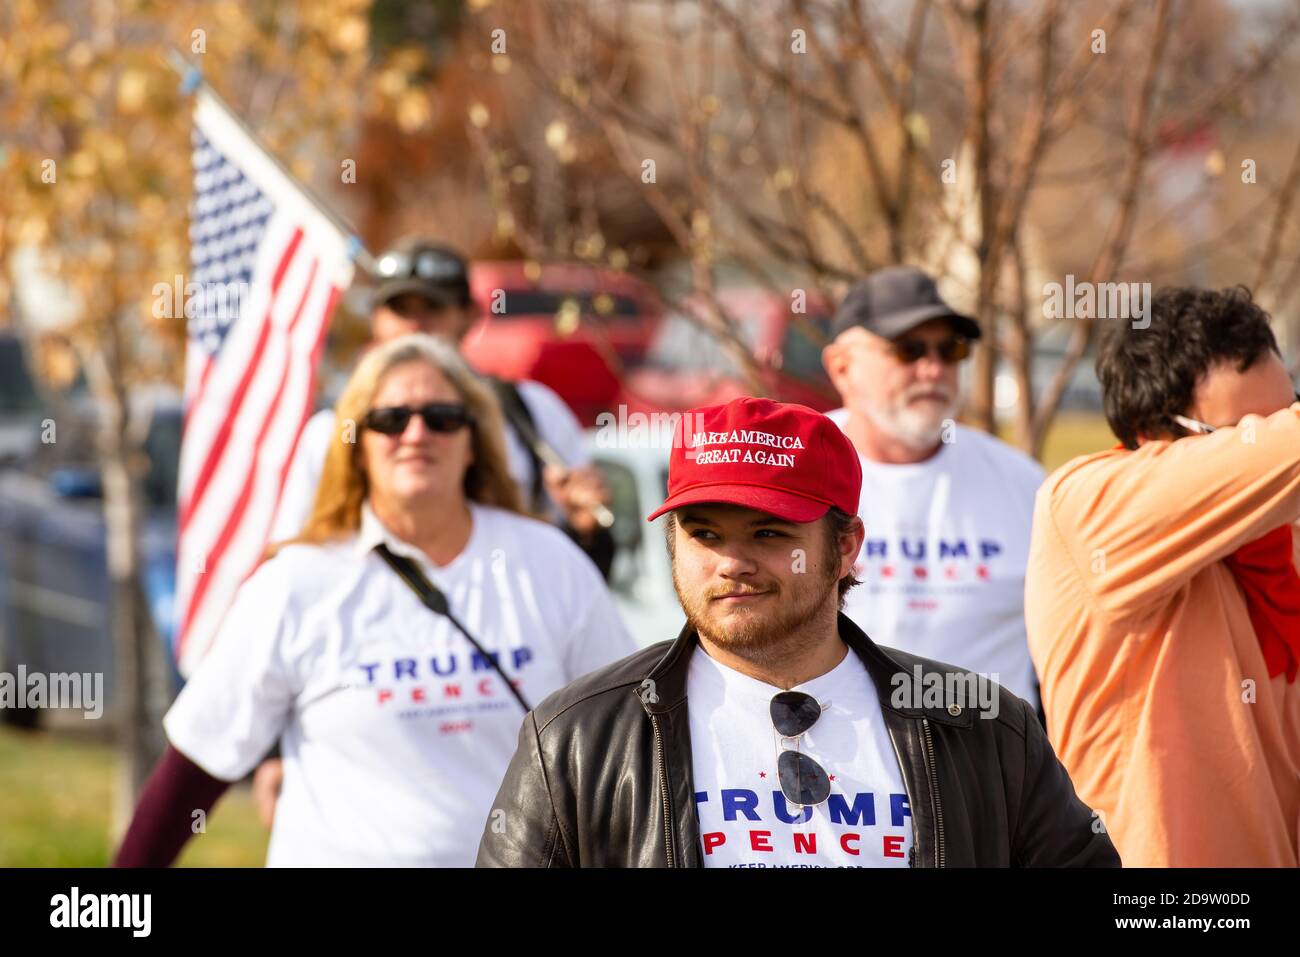 Helena, Montana / Nov 7, 2020: Pro-Trump supporter protesting at #stopthesteal rally at the Capitol wearing Make America Great Again red hat against t Stock Photo